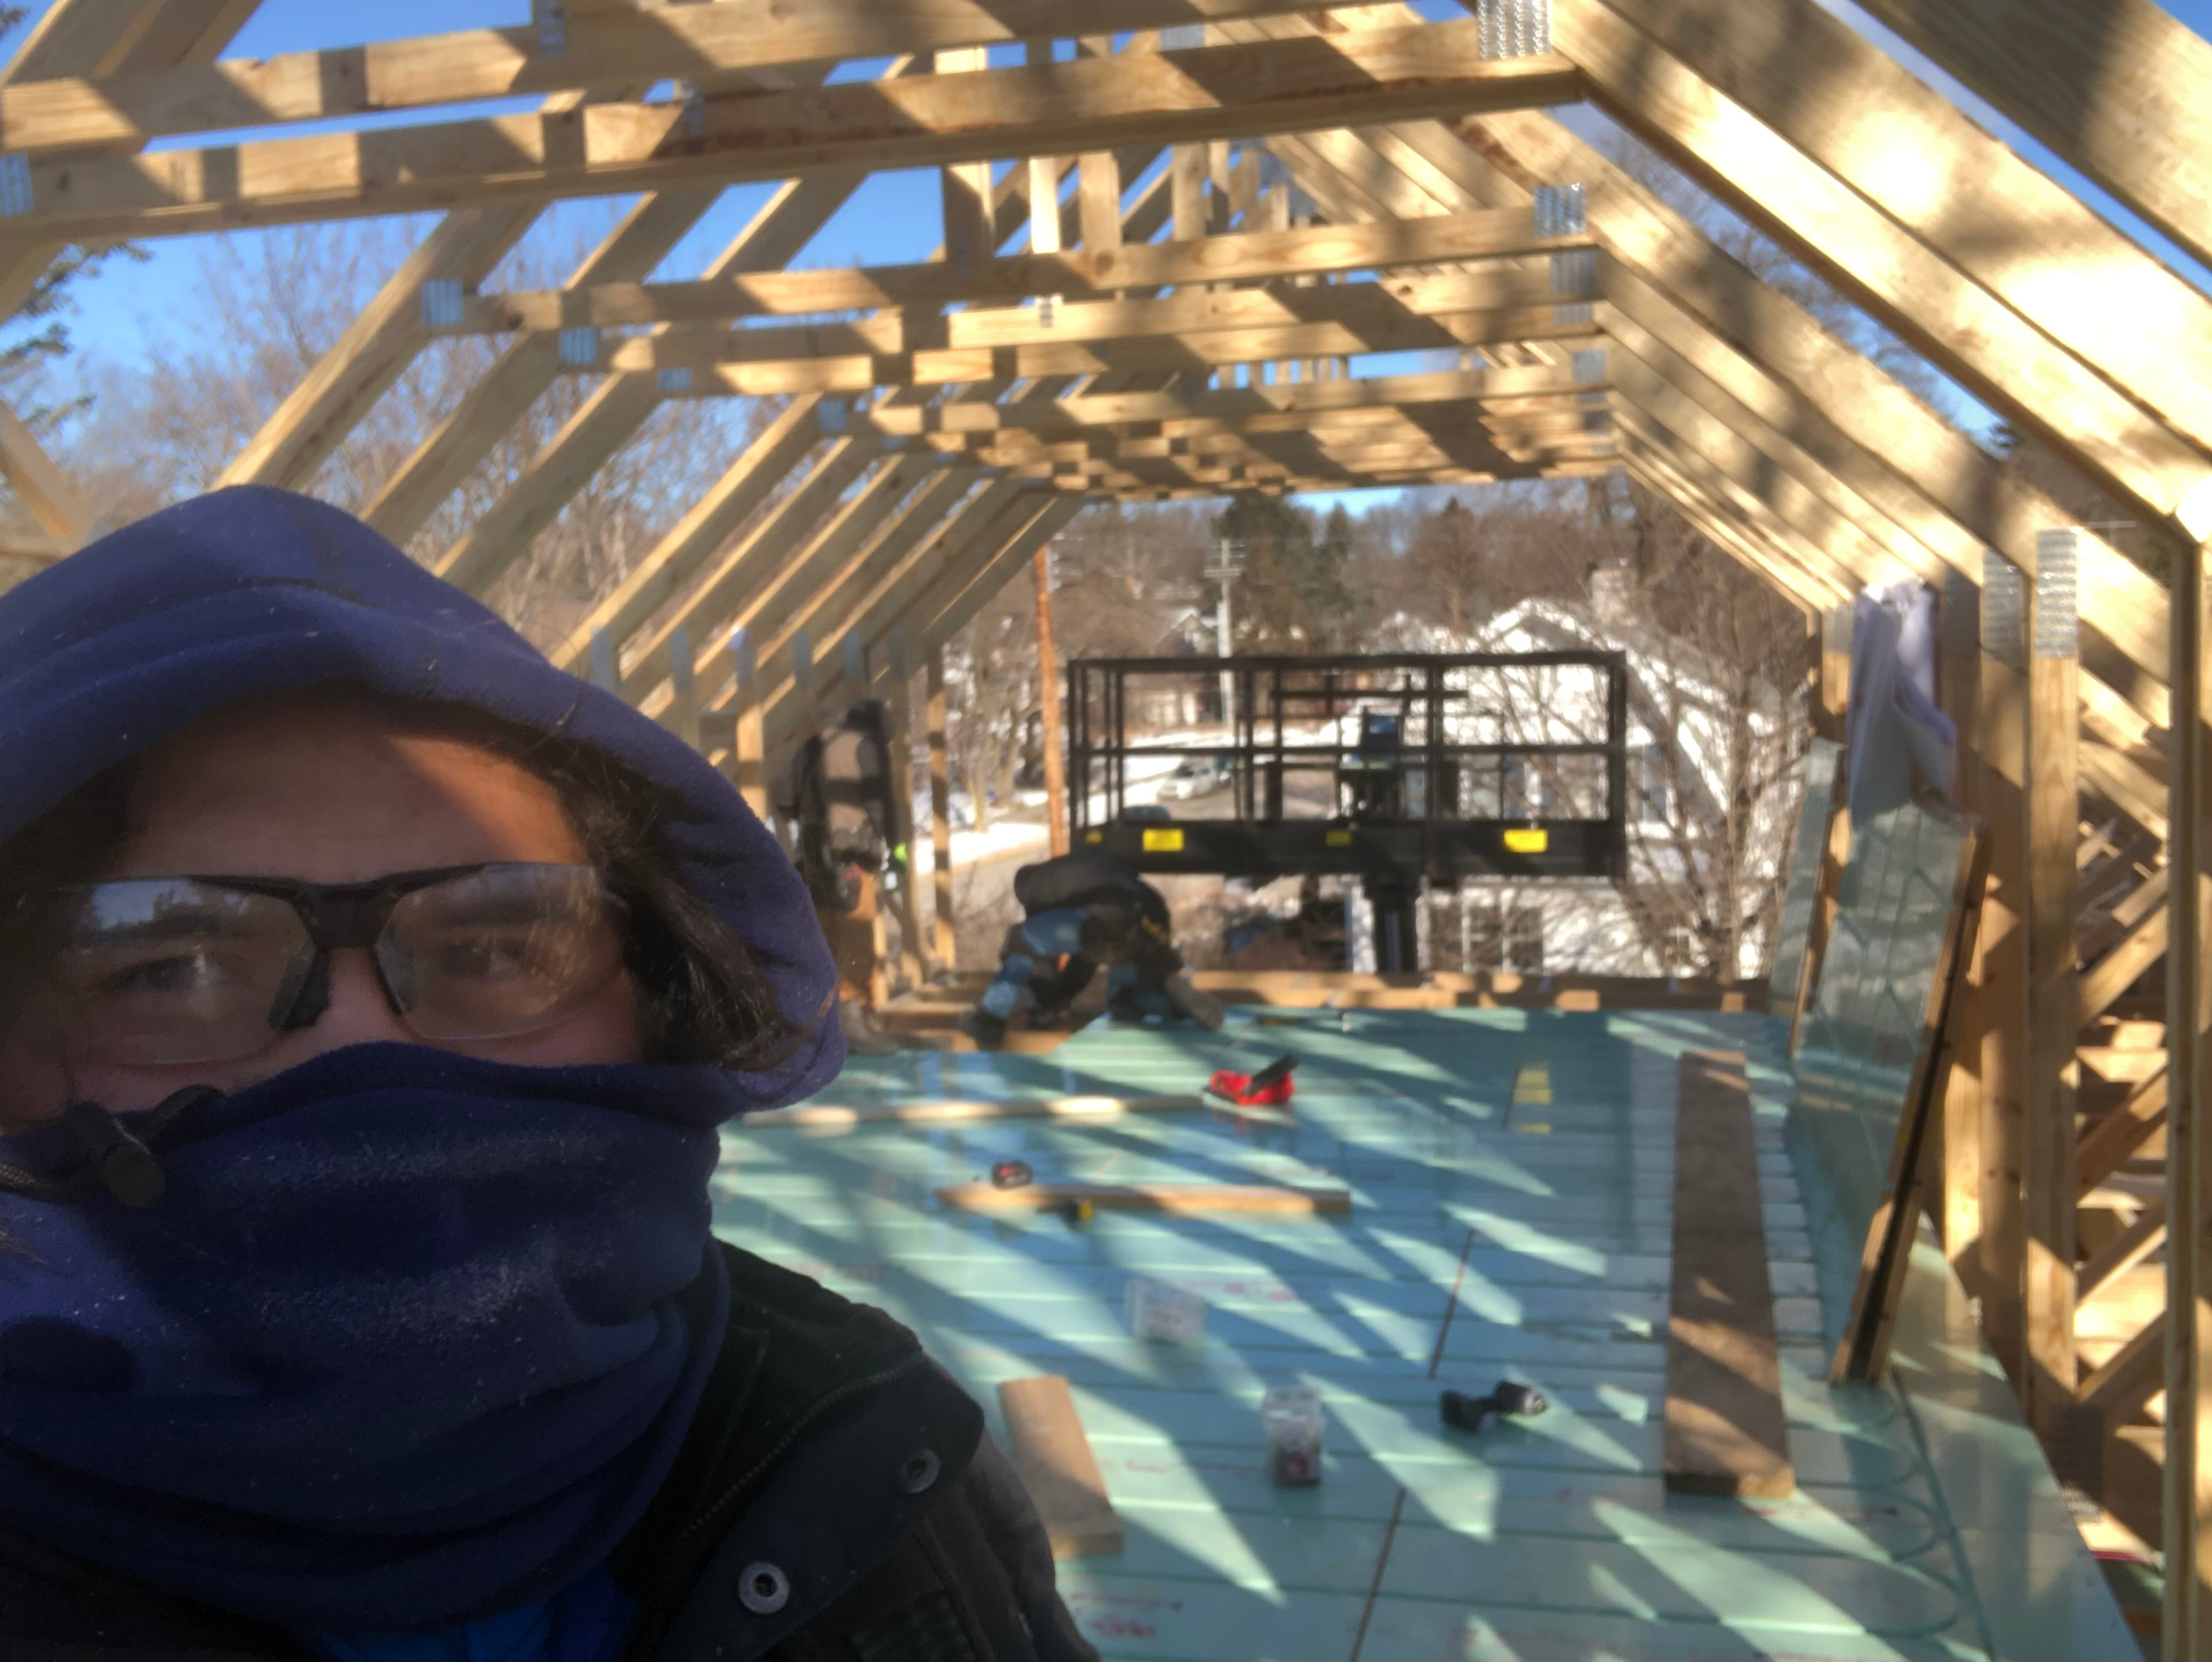 Victor Rojas working on an attic, Madison, winter ca 2020.